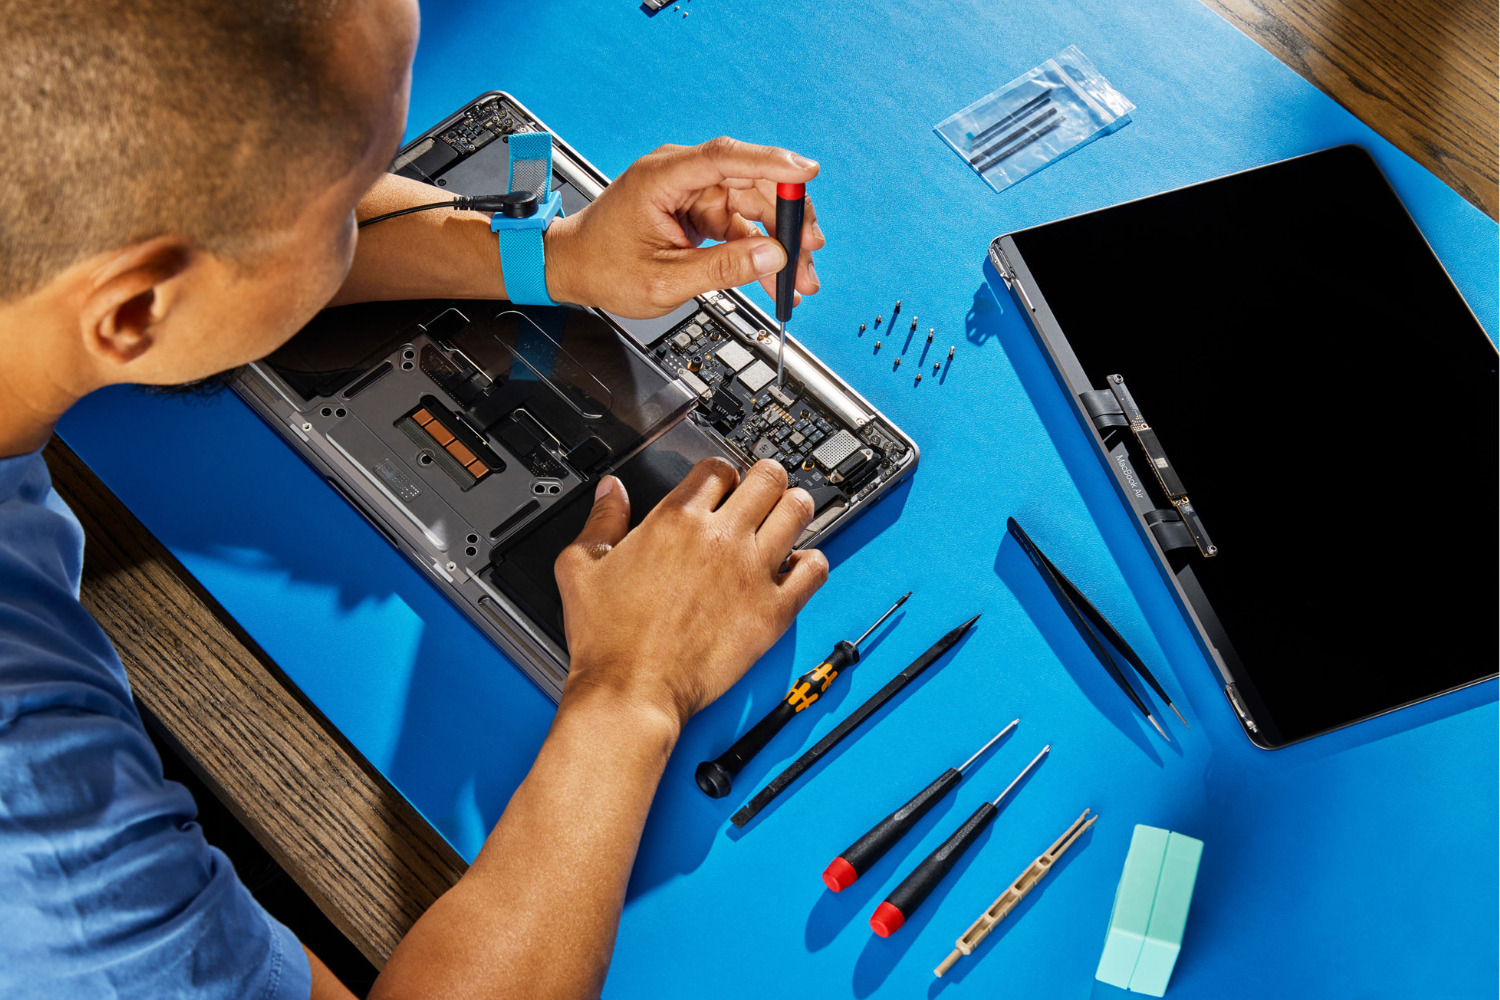 What You Should Know About Right to Repair